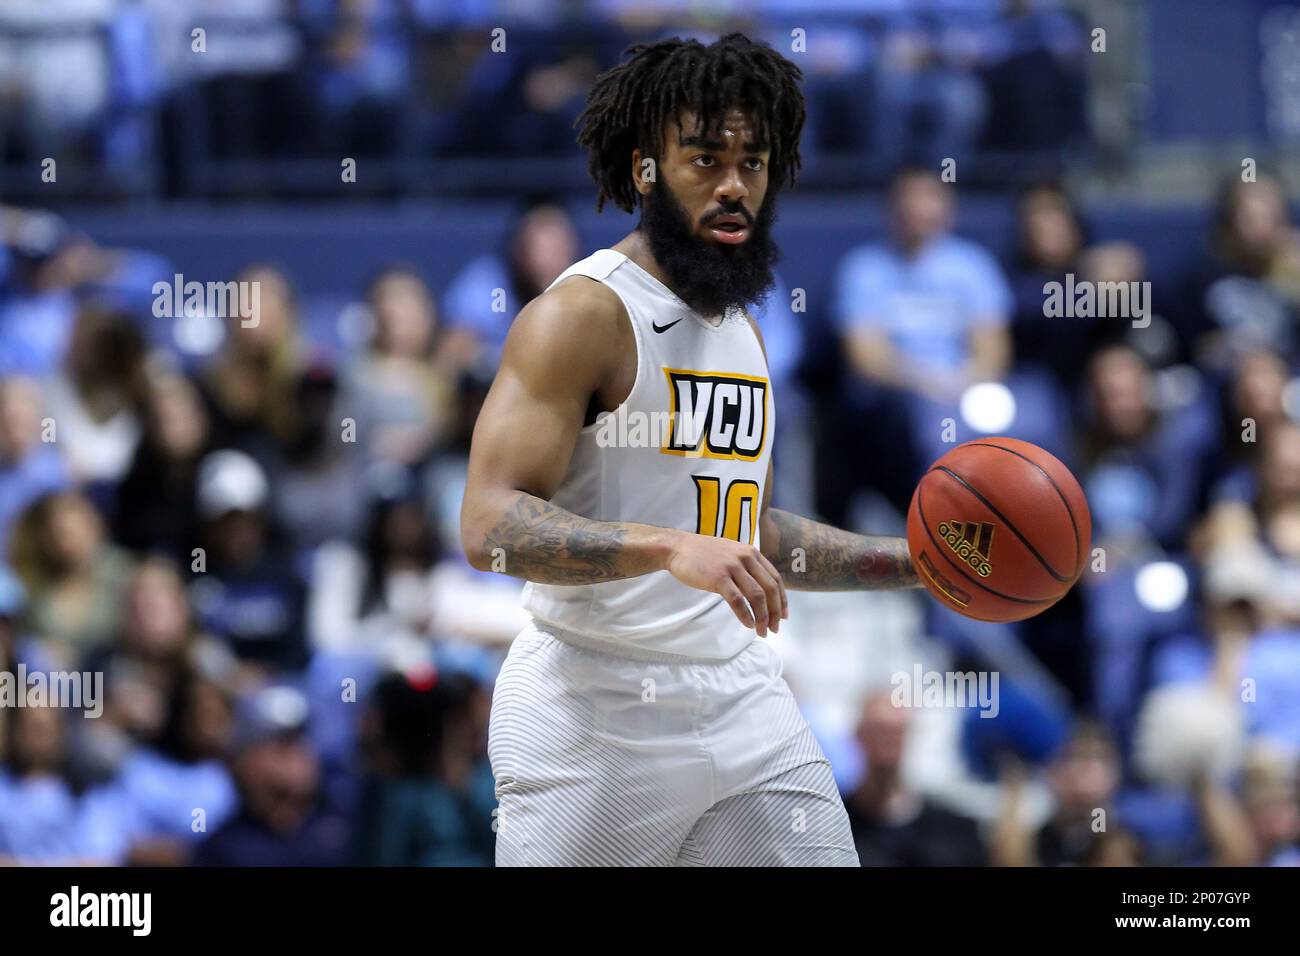 KINGSTON, RI - FEBRUARY 25: VCU Rams guard Jonathan Williams (10) with the  ball during the second half of a college basketball game between VCU Rams  and Rhode Island Rams on February